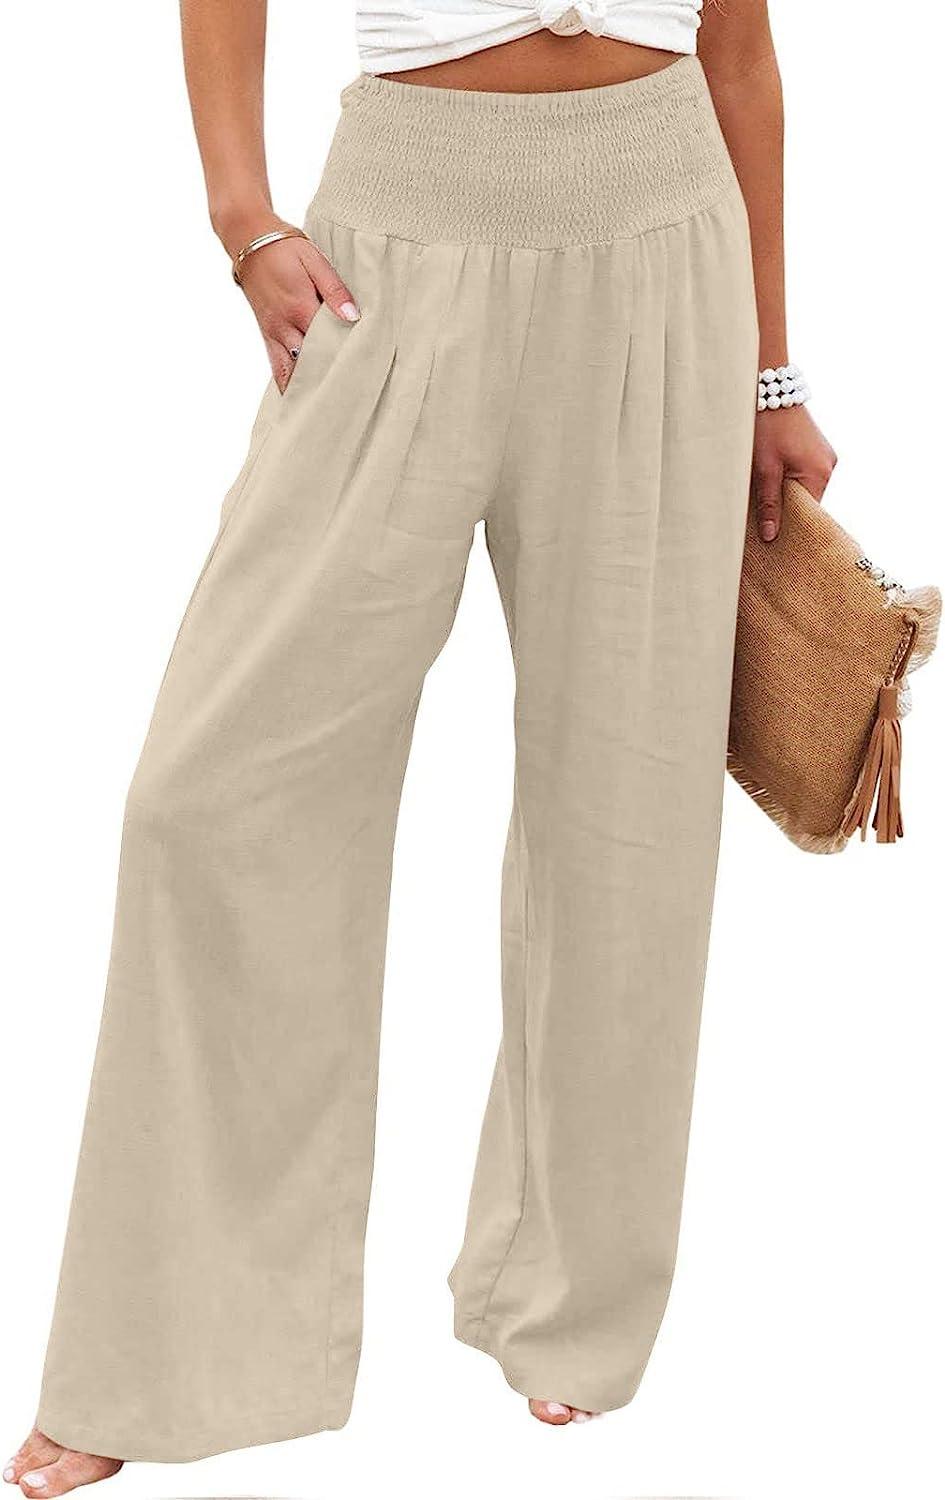 Woman's Casual Full-Length Loose Pants - Solid Stretchy High Waist Trousers  Long Straight Wide Leg Pants with Pockets (White,S)